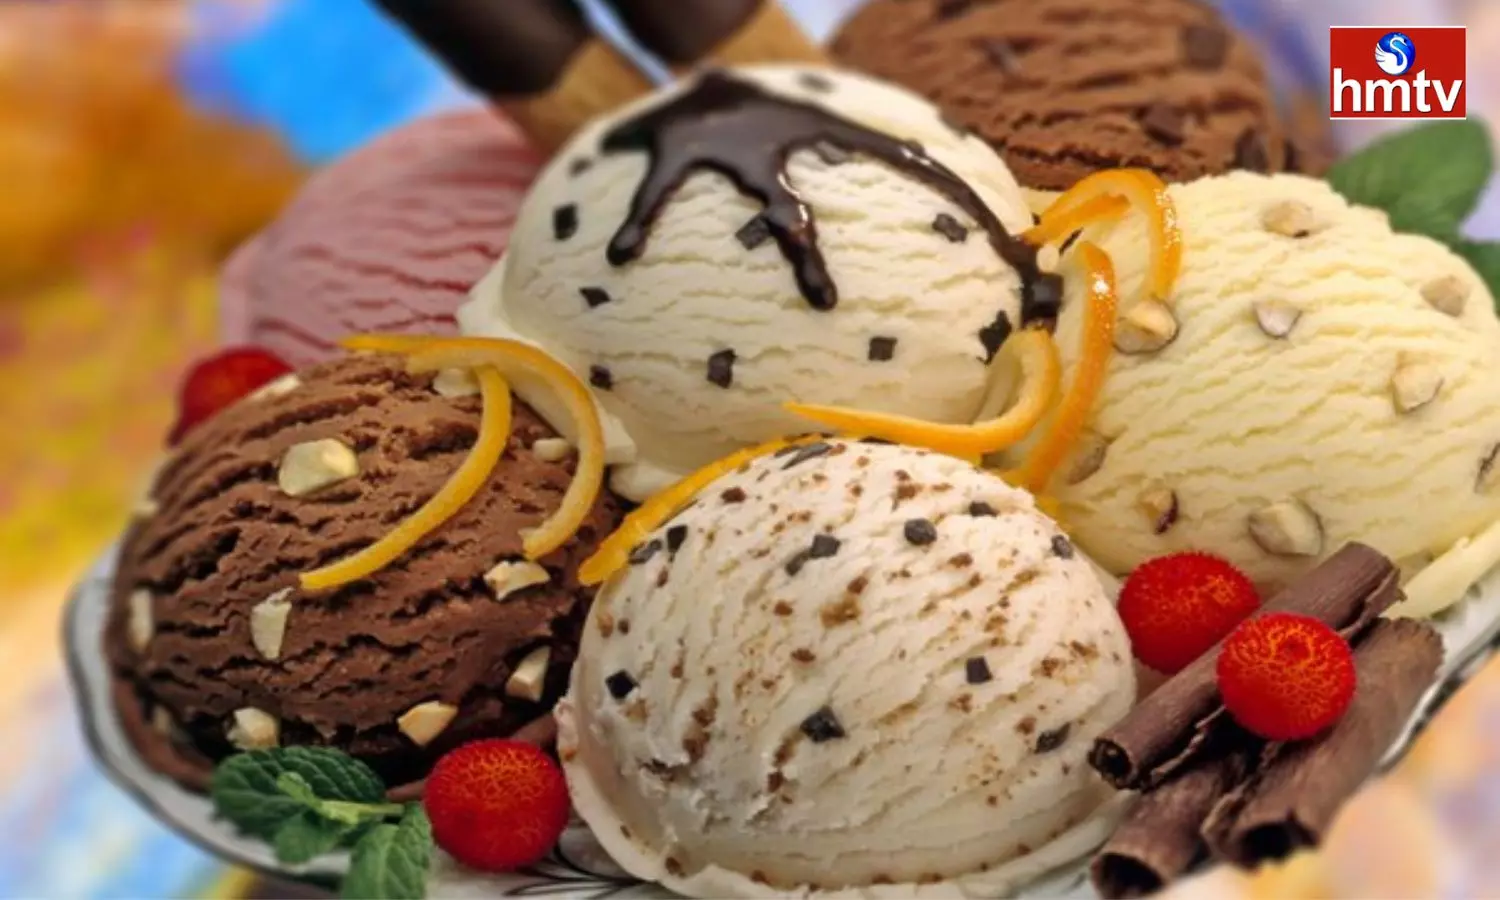 Are You Eating Too Much Ice Cream Because It Is Hot Know The Side Effects